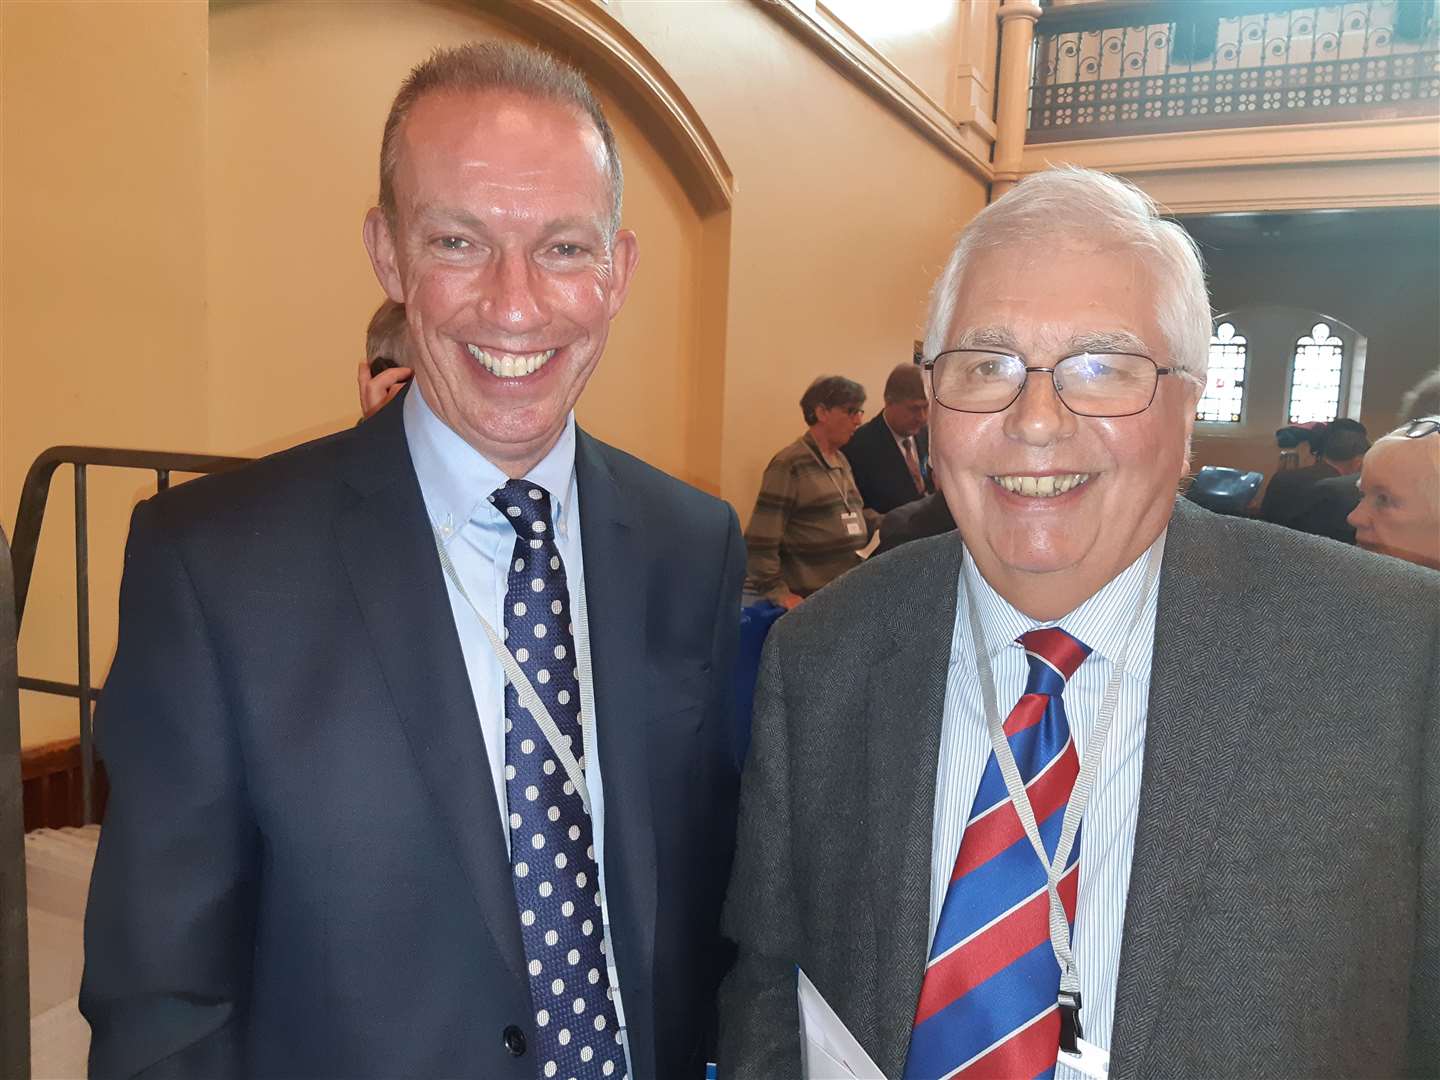 Tories Trevor Bartlett and Mike Conolly who both retained seats in Little Stour and Ashstone